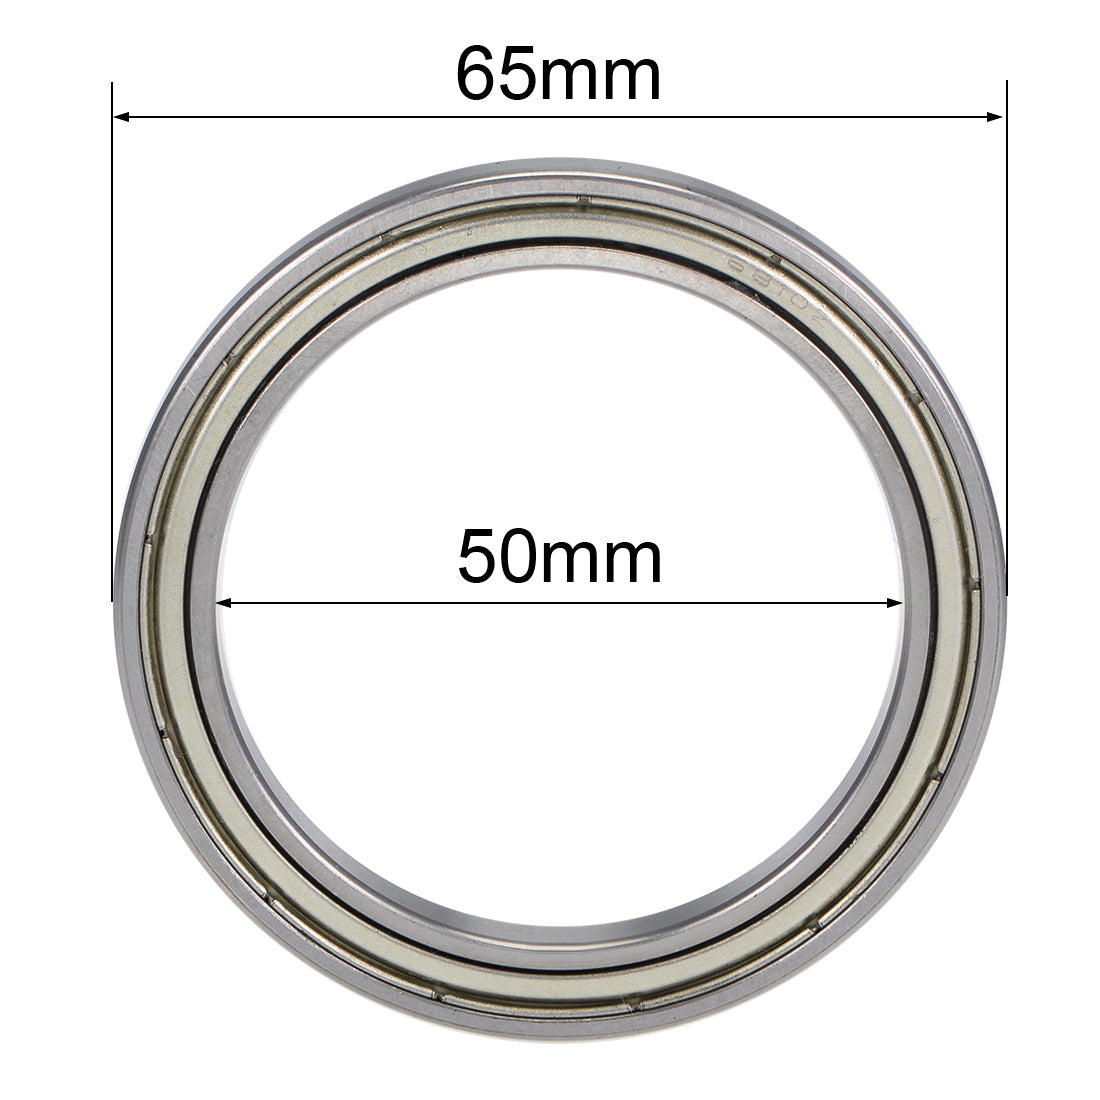 uxcell Uxcell Deep Groove Ball Bearings Thin Section Double Shielded Chrome Steel